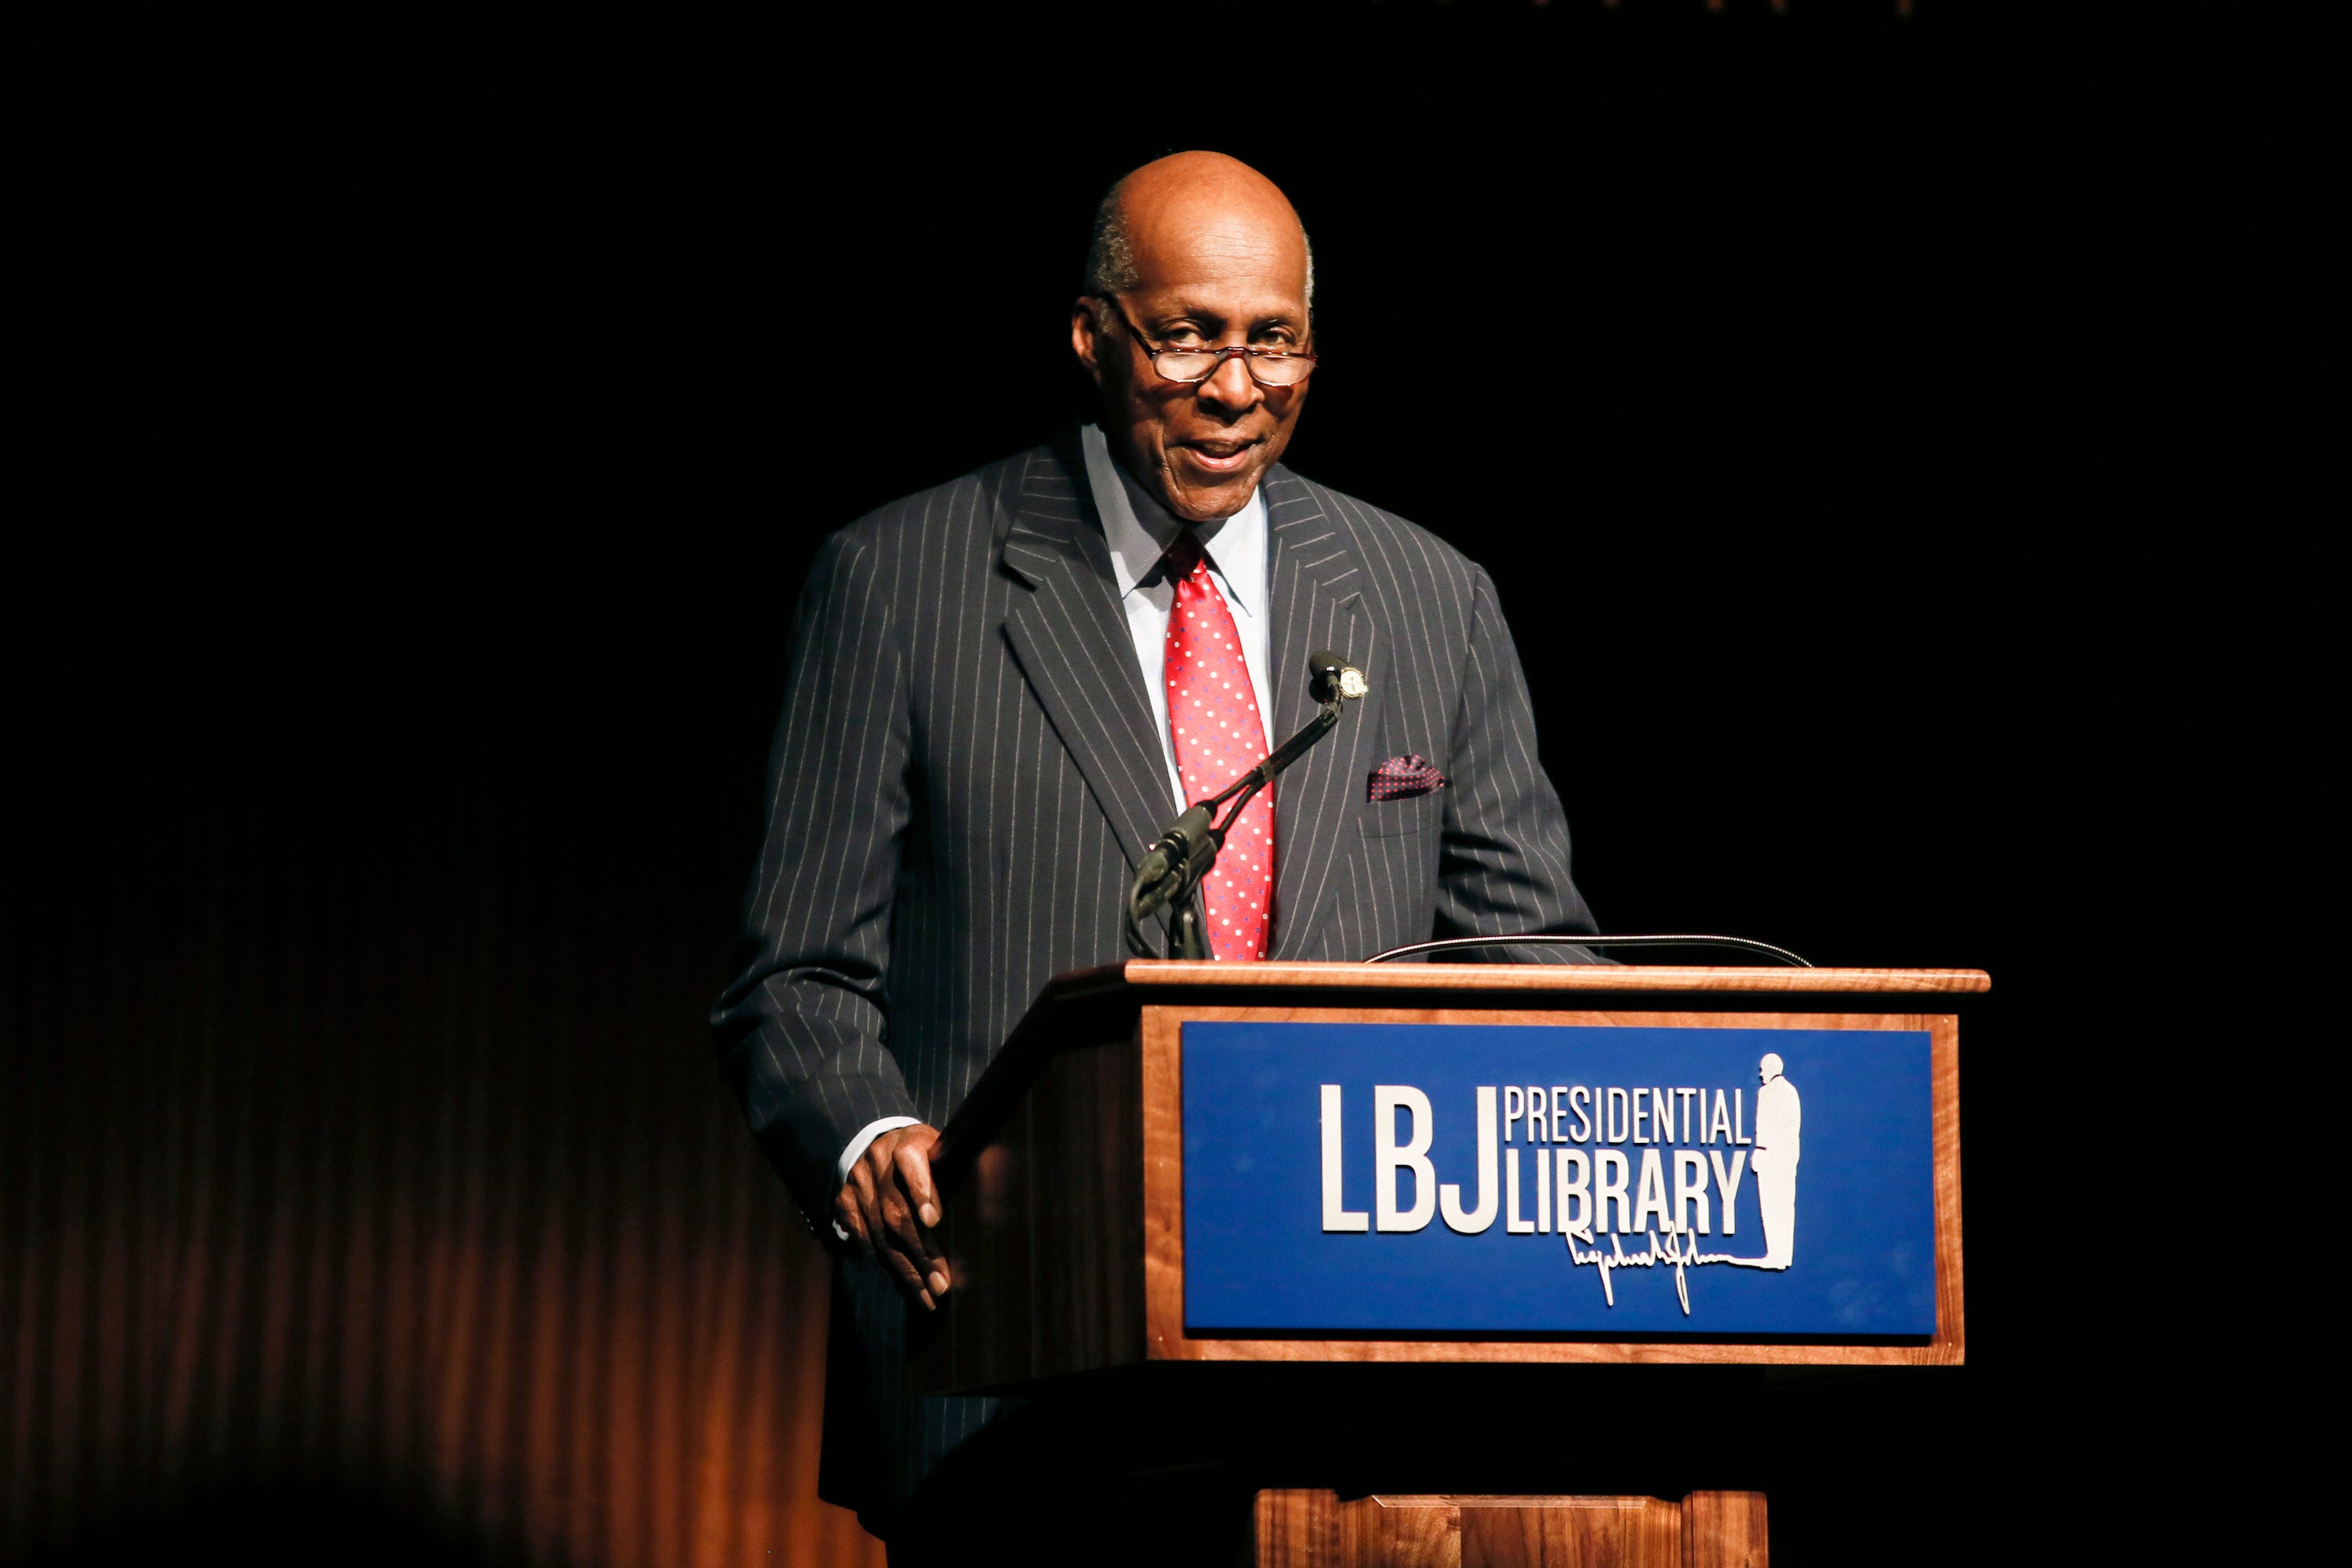 Civil rights activist Vernon Jordan introduces former President Bill Clinton during the Civil Rights Summit on April 9, 2014, in Austin, Texas. Jordan, who rose from humble beginnings in the segregated South to become a champion of civil rights before reinventing himself as a Washington insider and corporate influencer, died March 2, according to a statement from his daughter. He was 85.